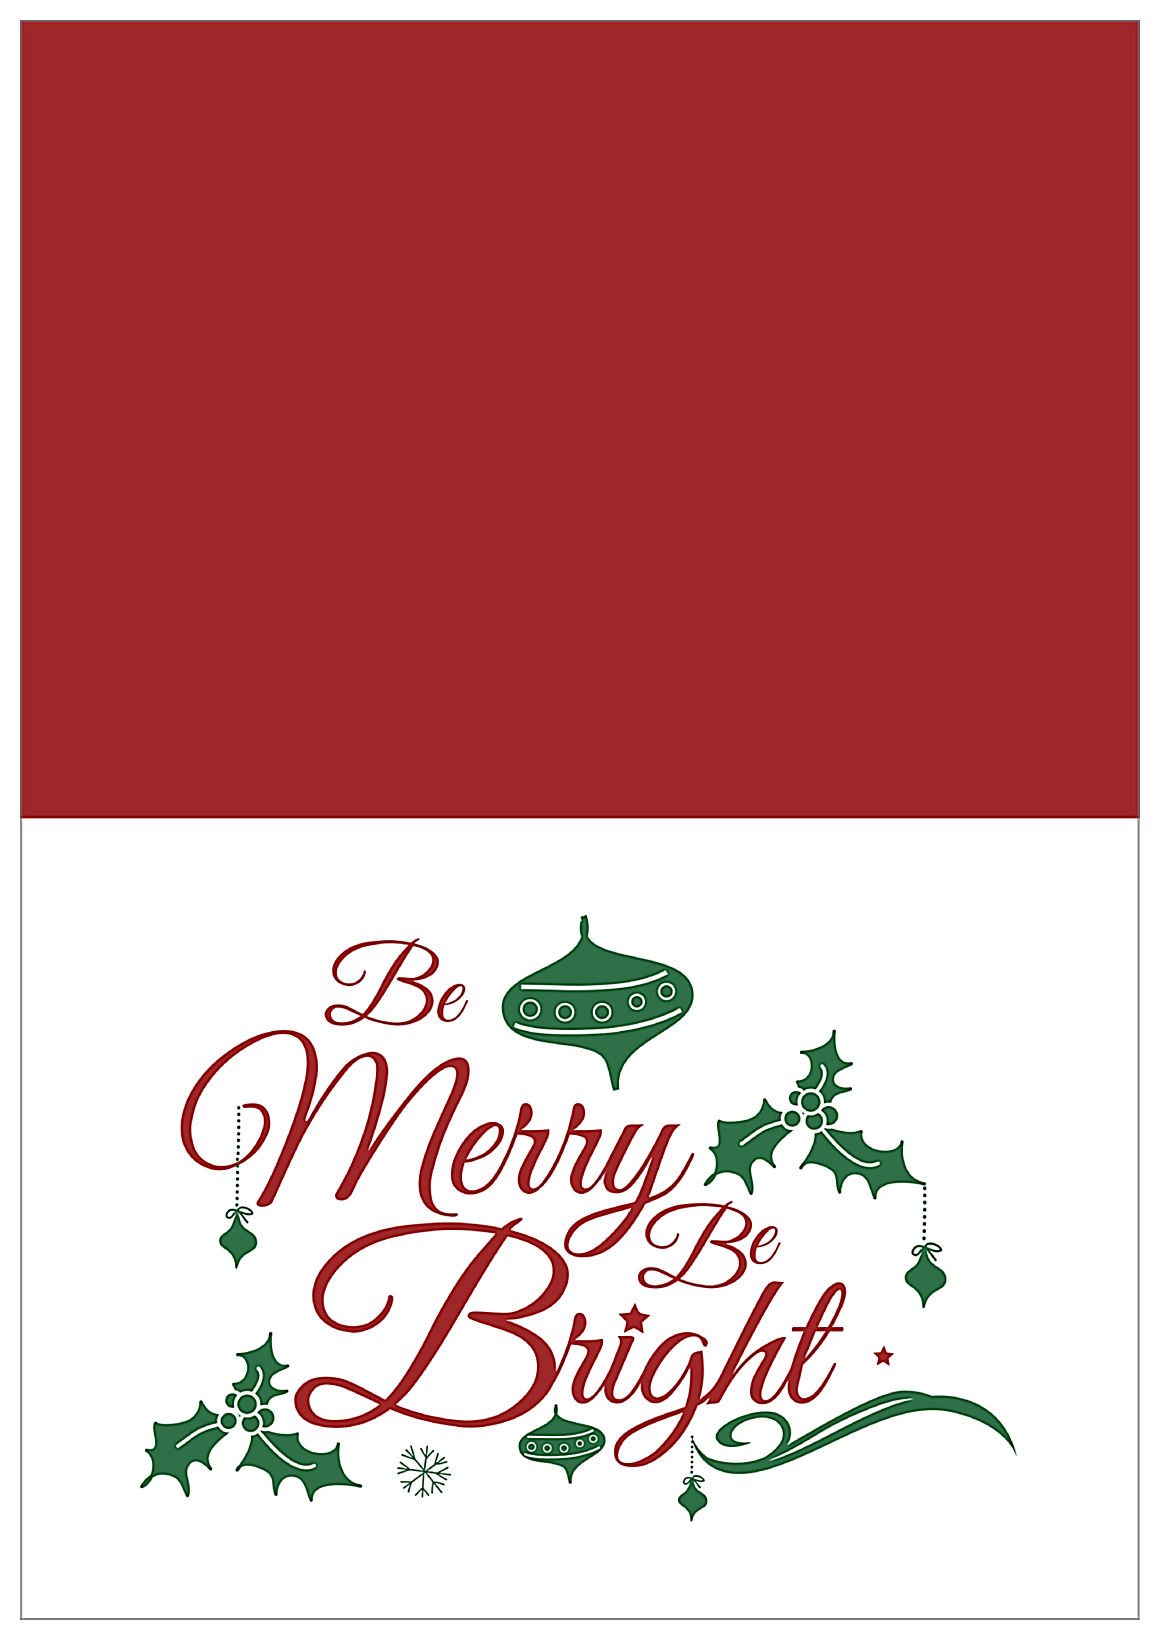 Merry Bright front - Greeting Cards Maker